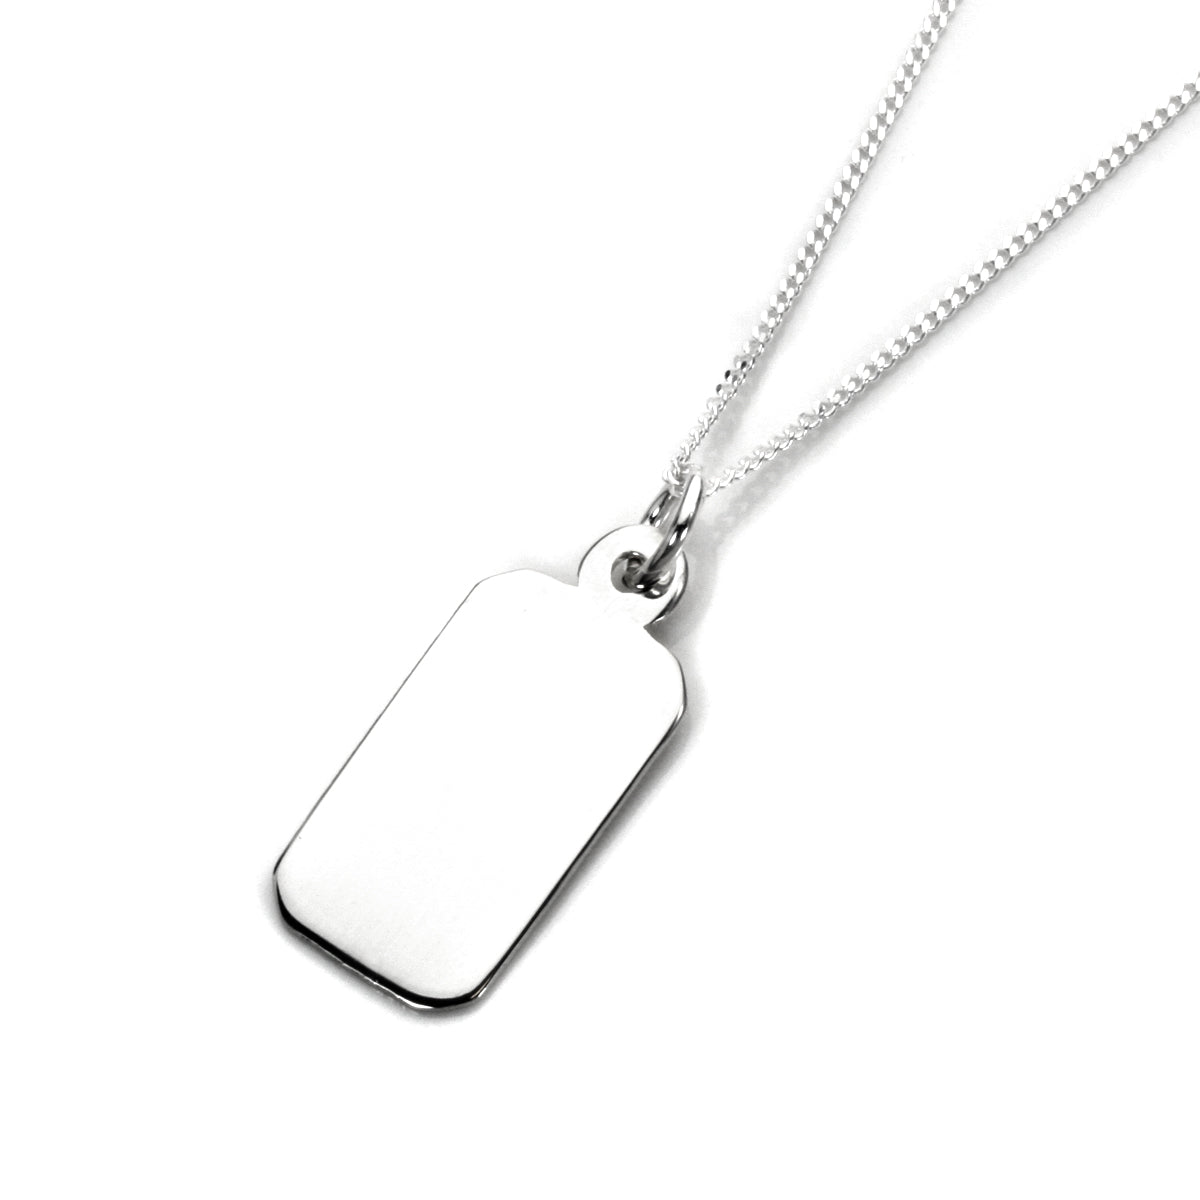 Sterling Silver Engravable Rectangular Pendant - 16 - 22 Inches